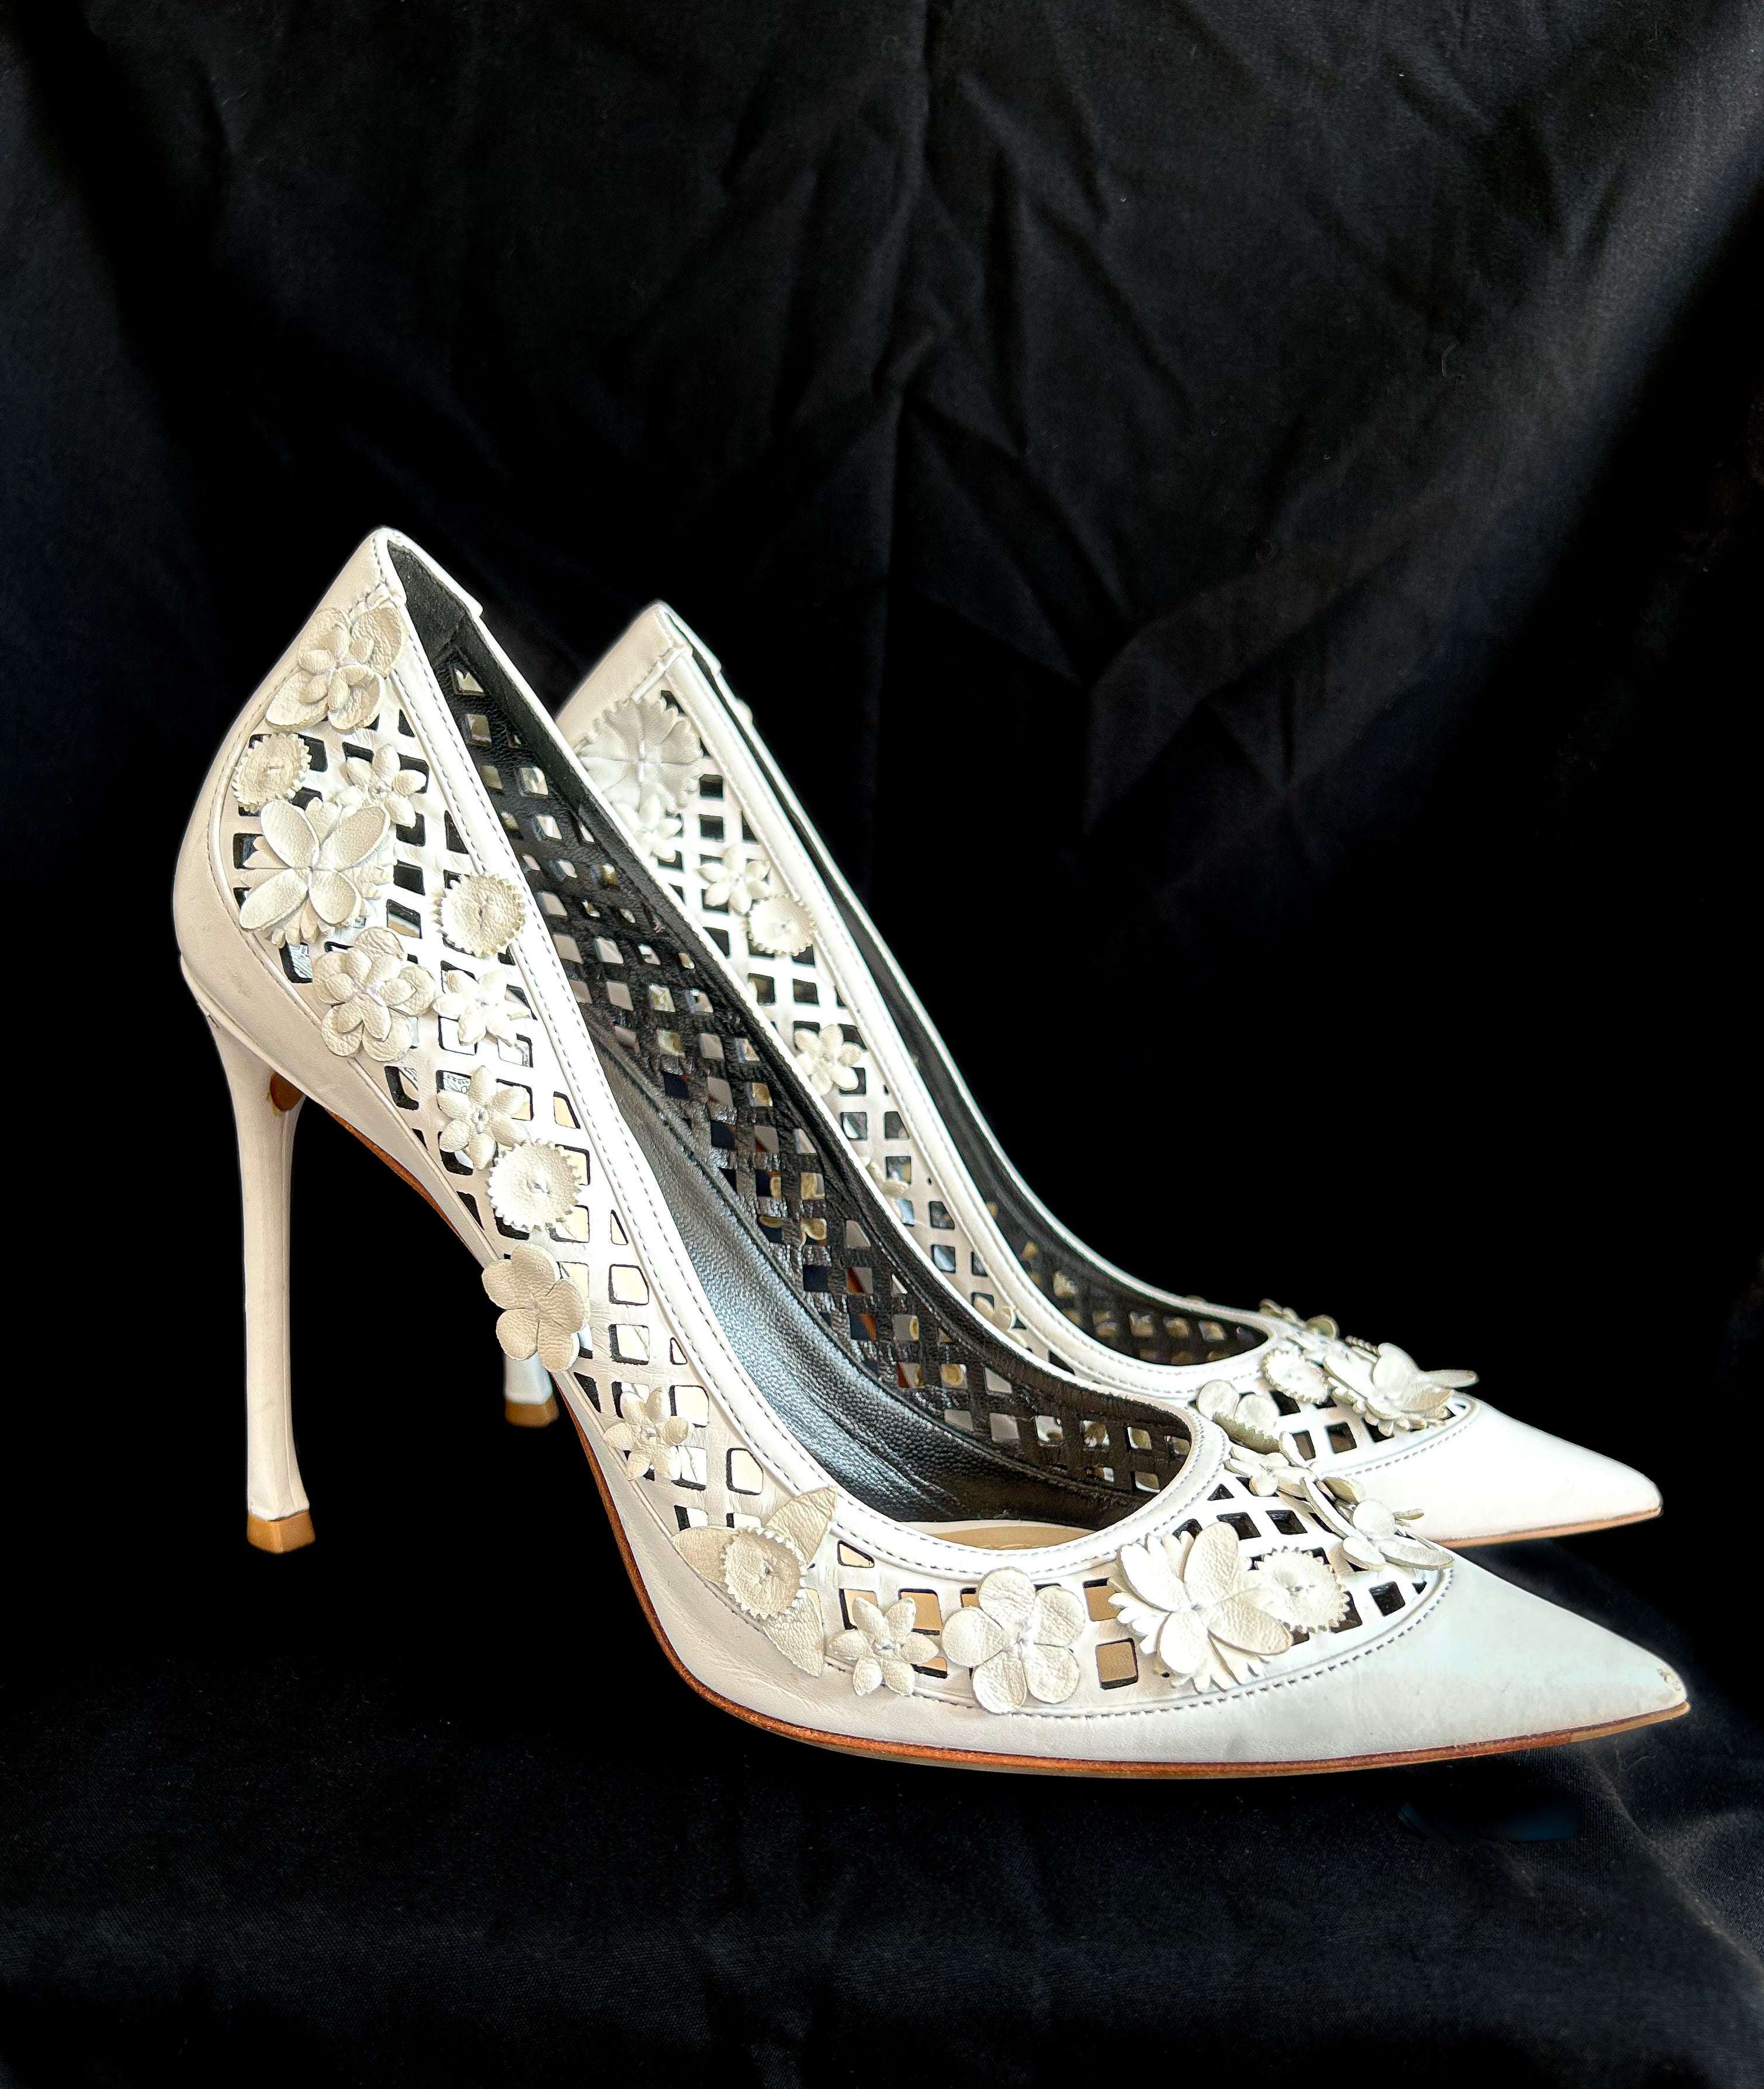 Christian Dior White Leather Pumps size 40 made in Italy